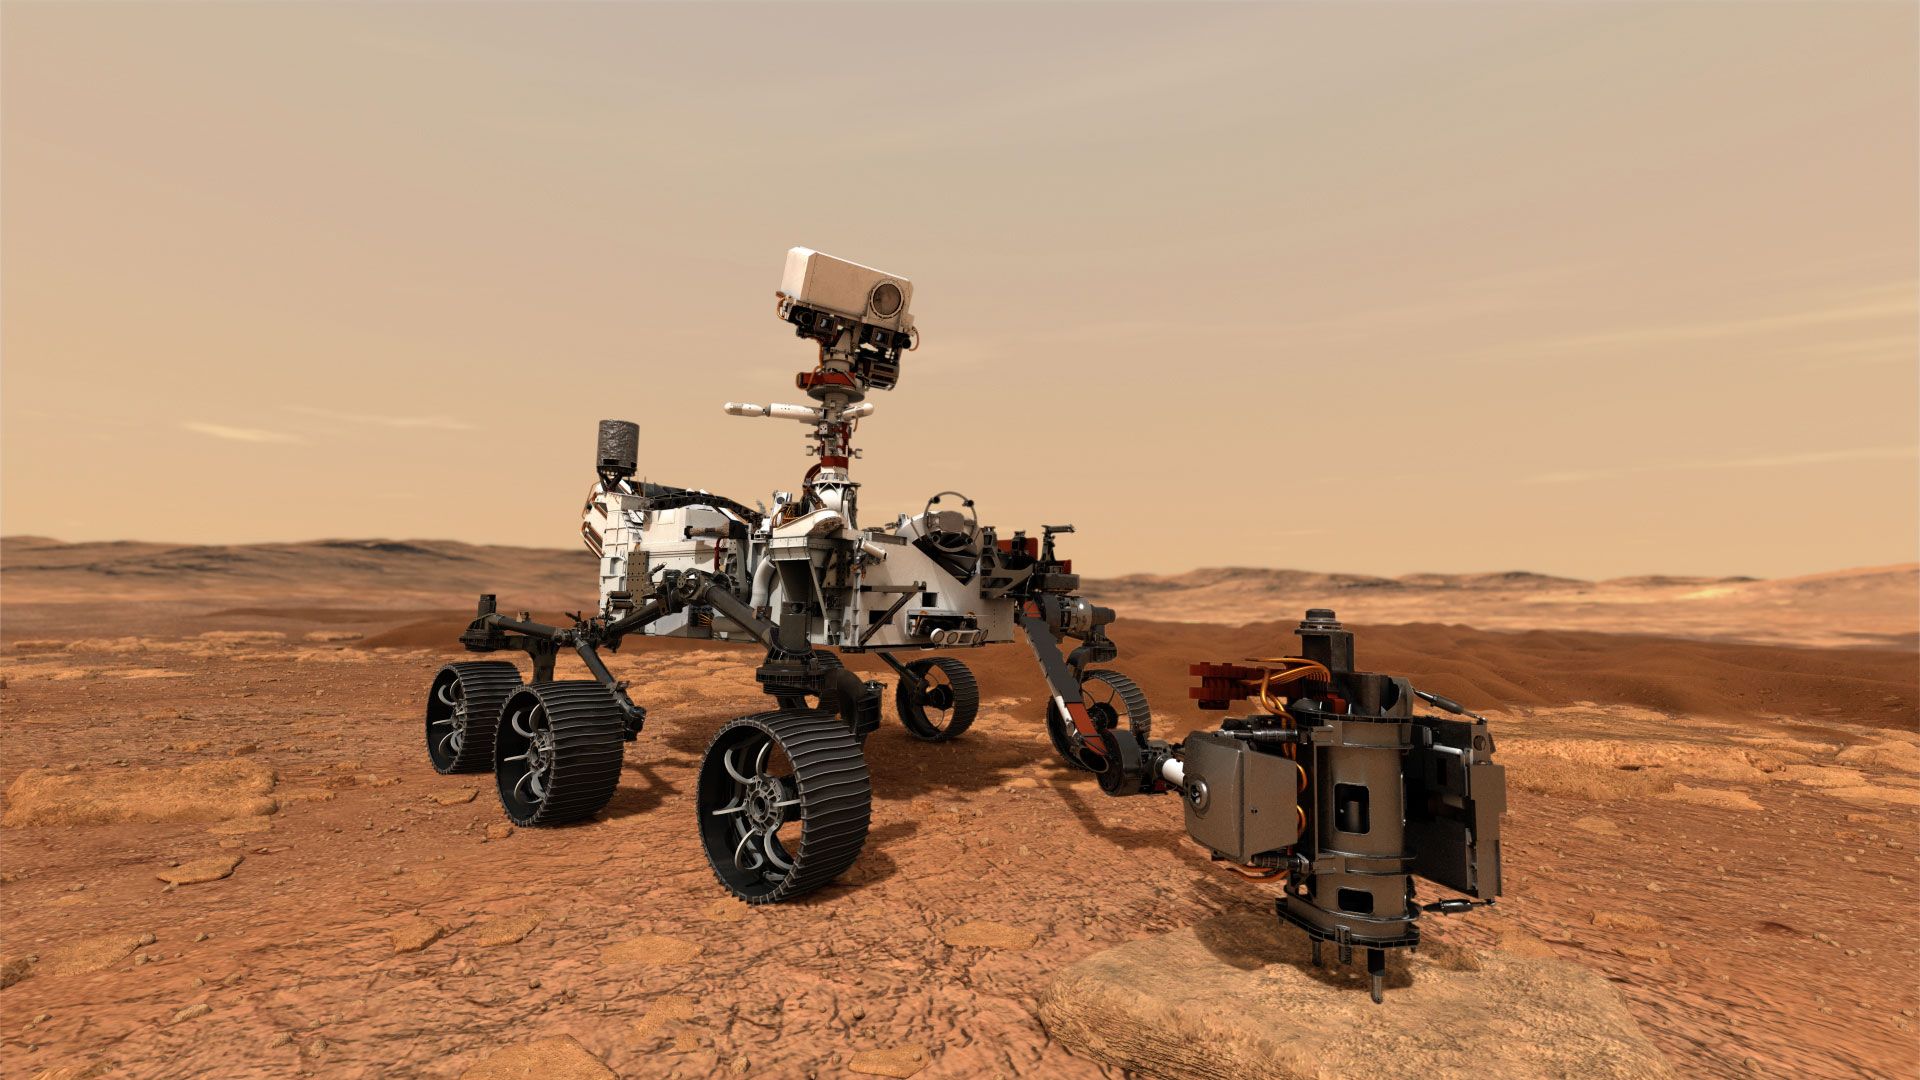 Danish researchers play key role in NASA mission to Mars